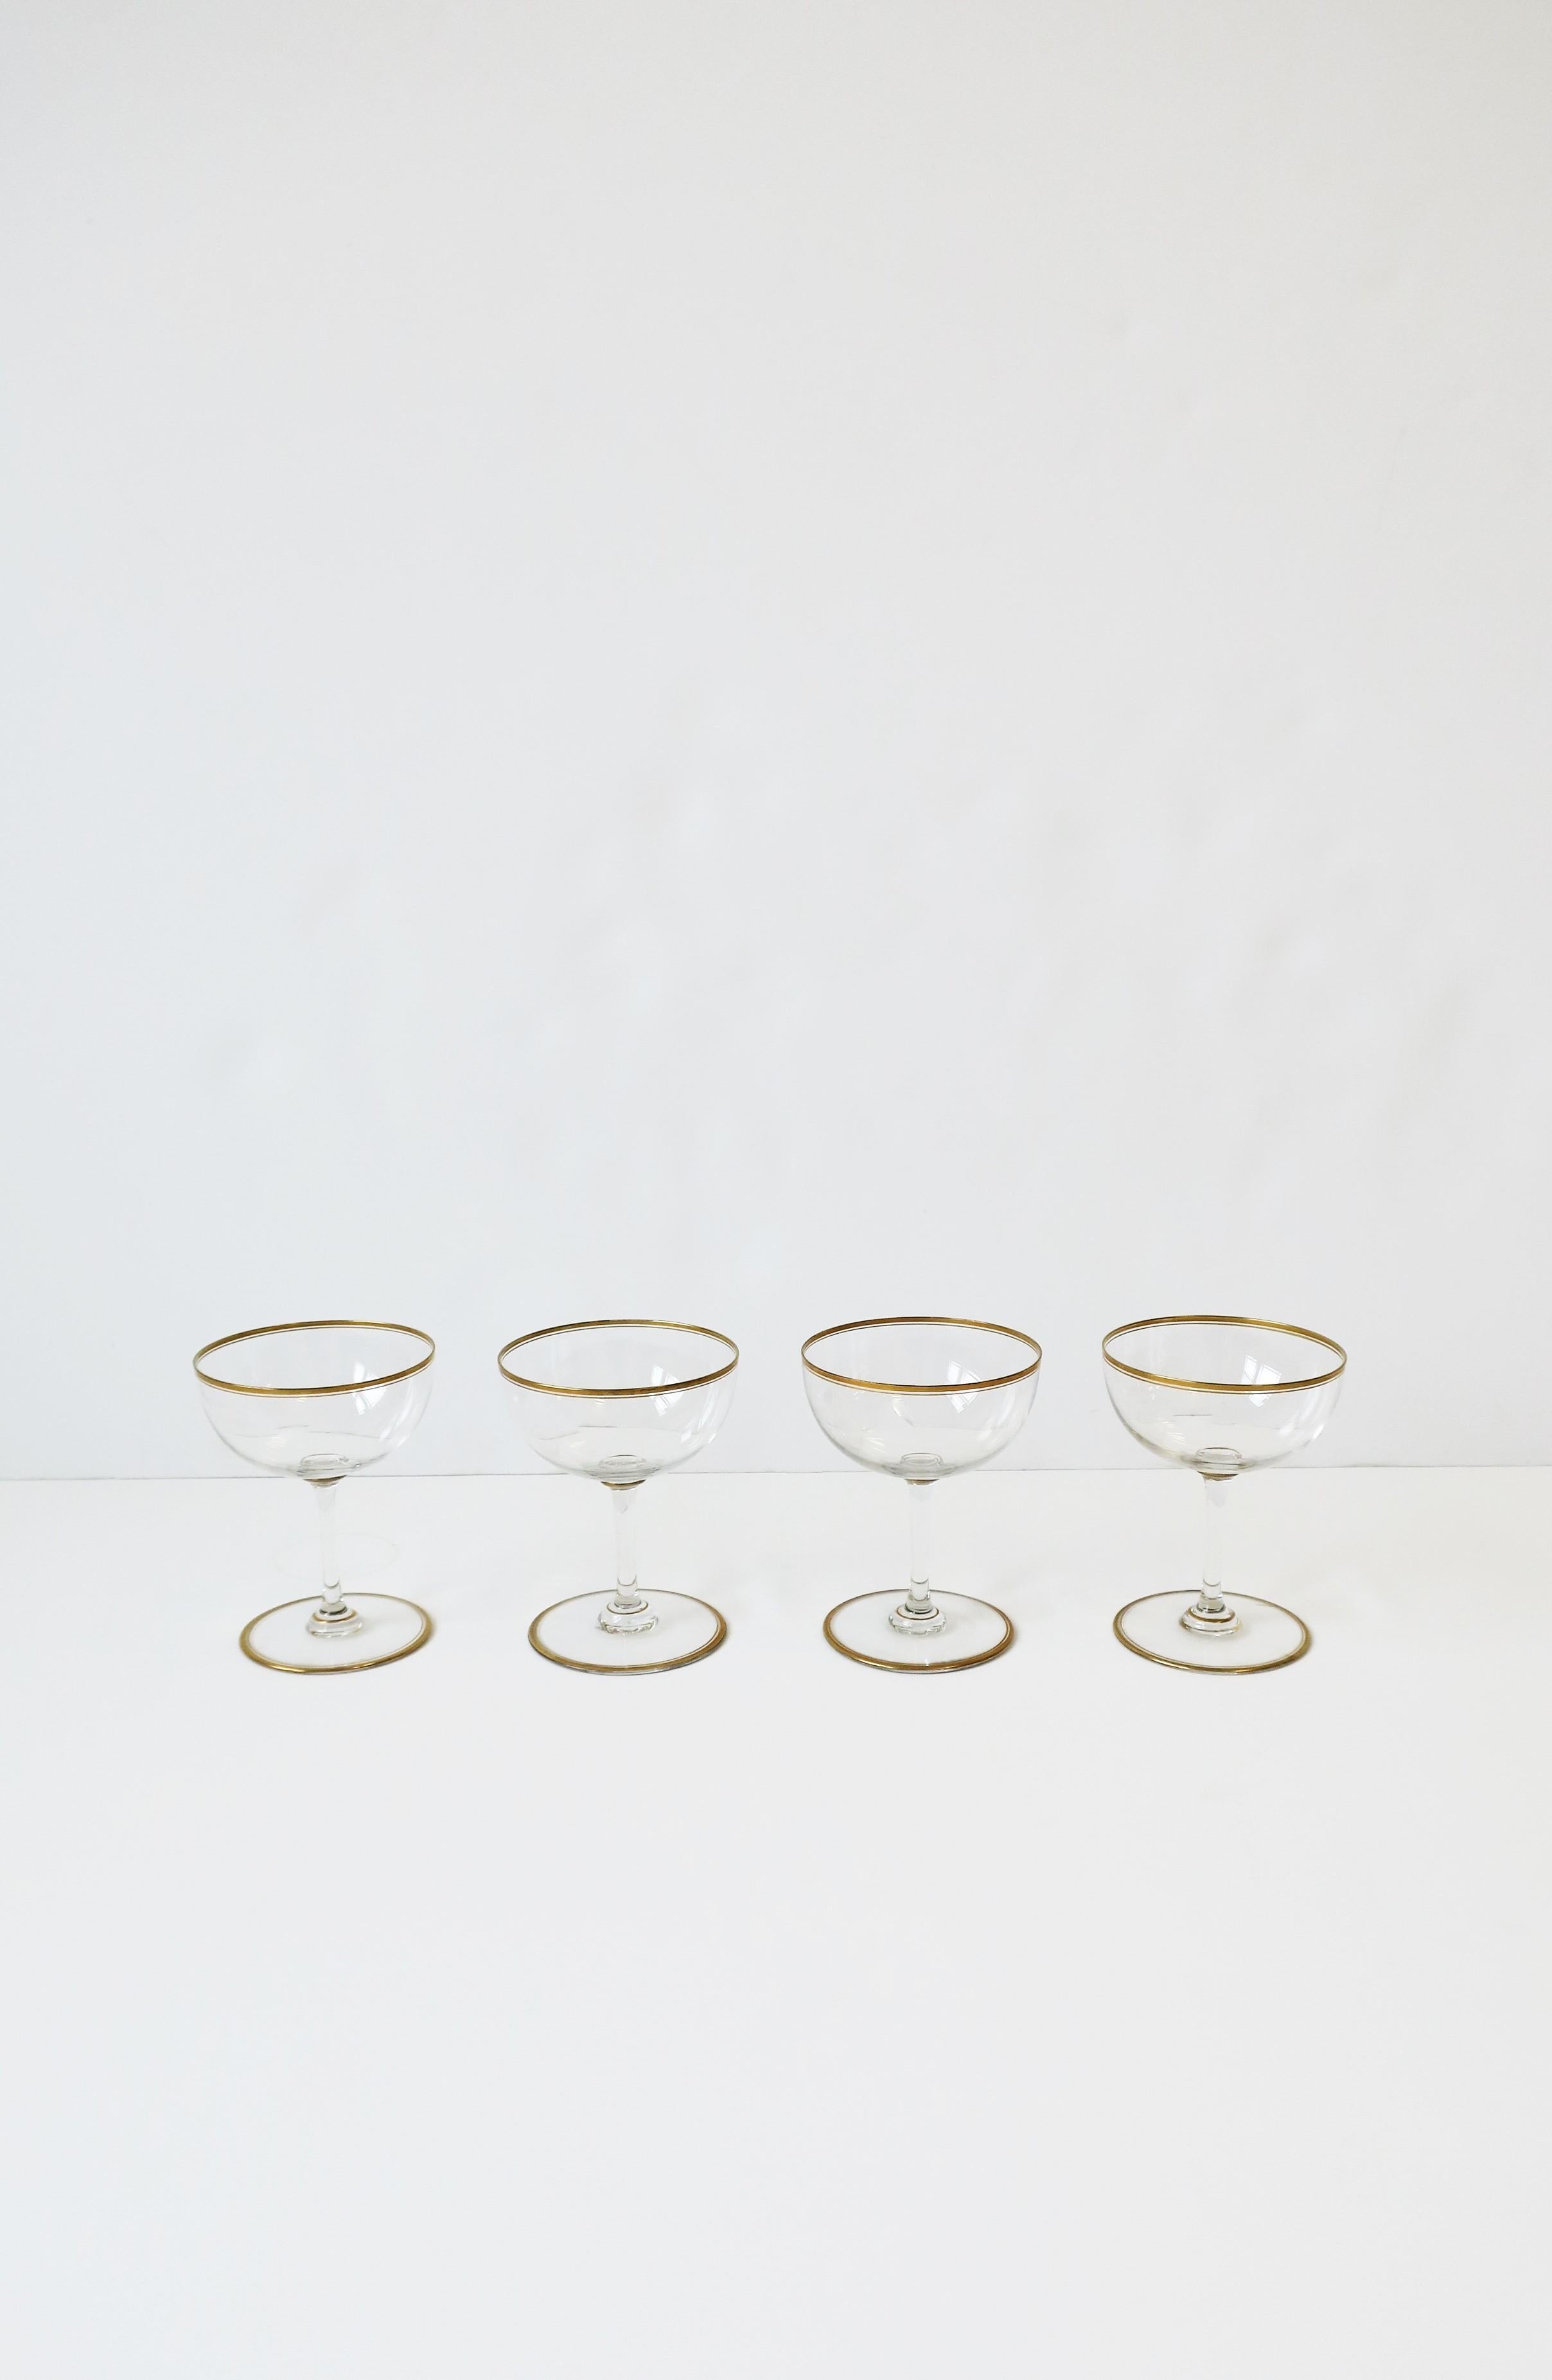 European Mid-Century Modern Cocktail or Champagne Glasses Coupes w/Gold Detail, Set of 4